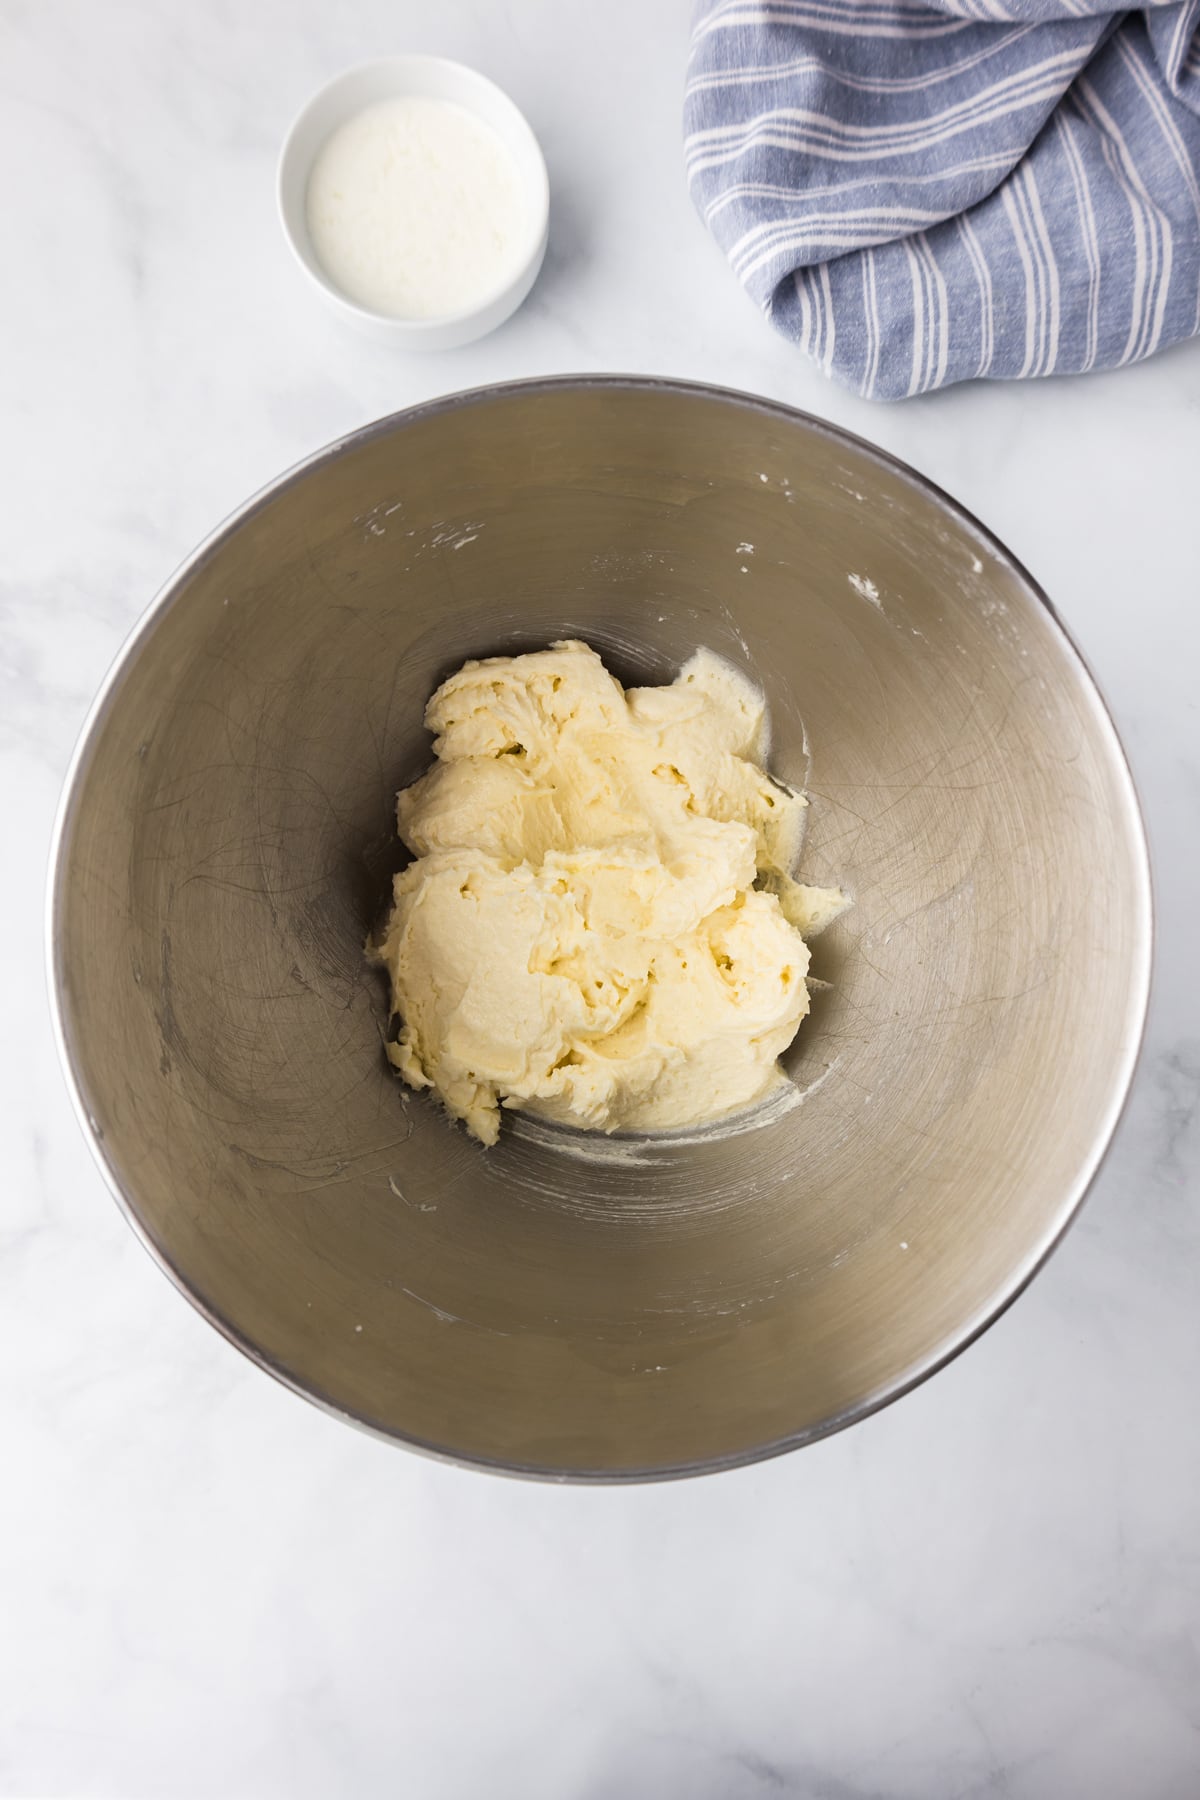 Butter creamed in a silver mixing bowl.